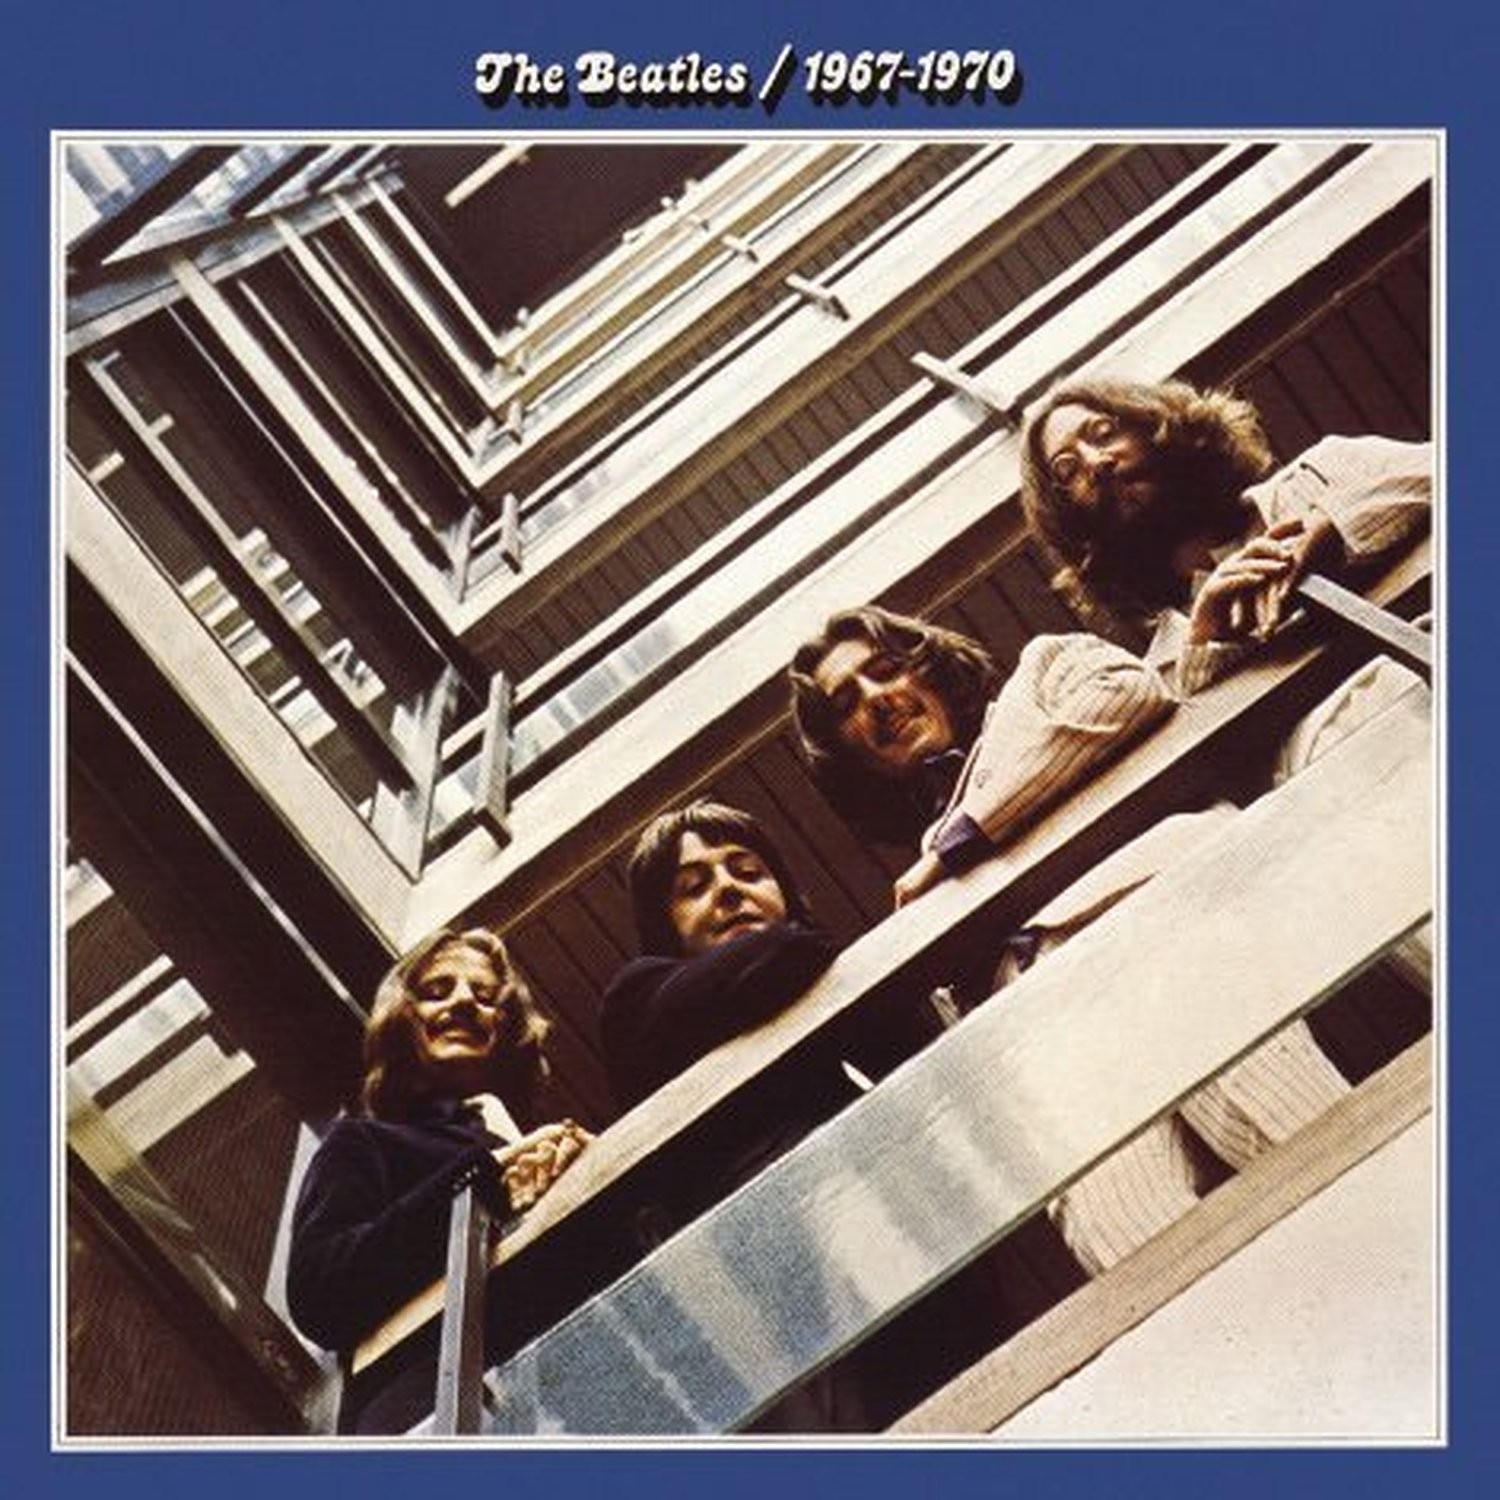 The Beatles Blue Album Greeting Birthday Card Any Occasion Cover Fan Official